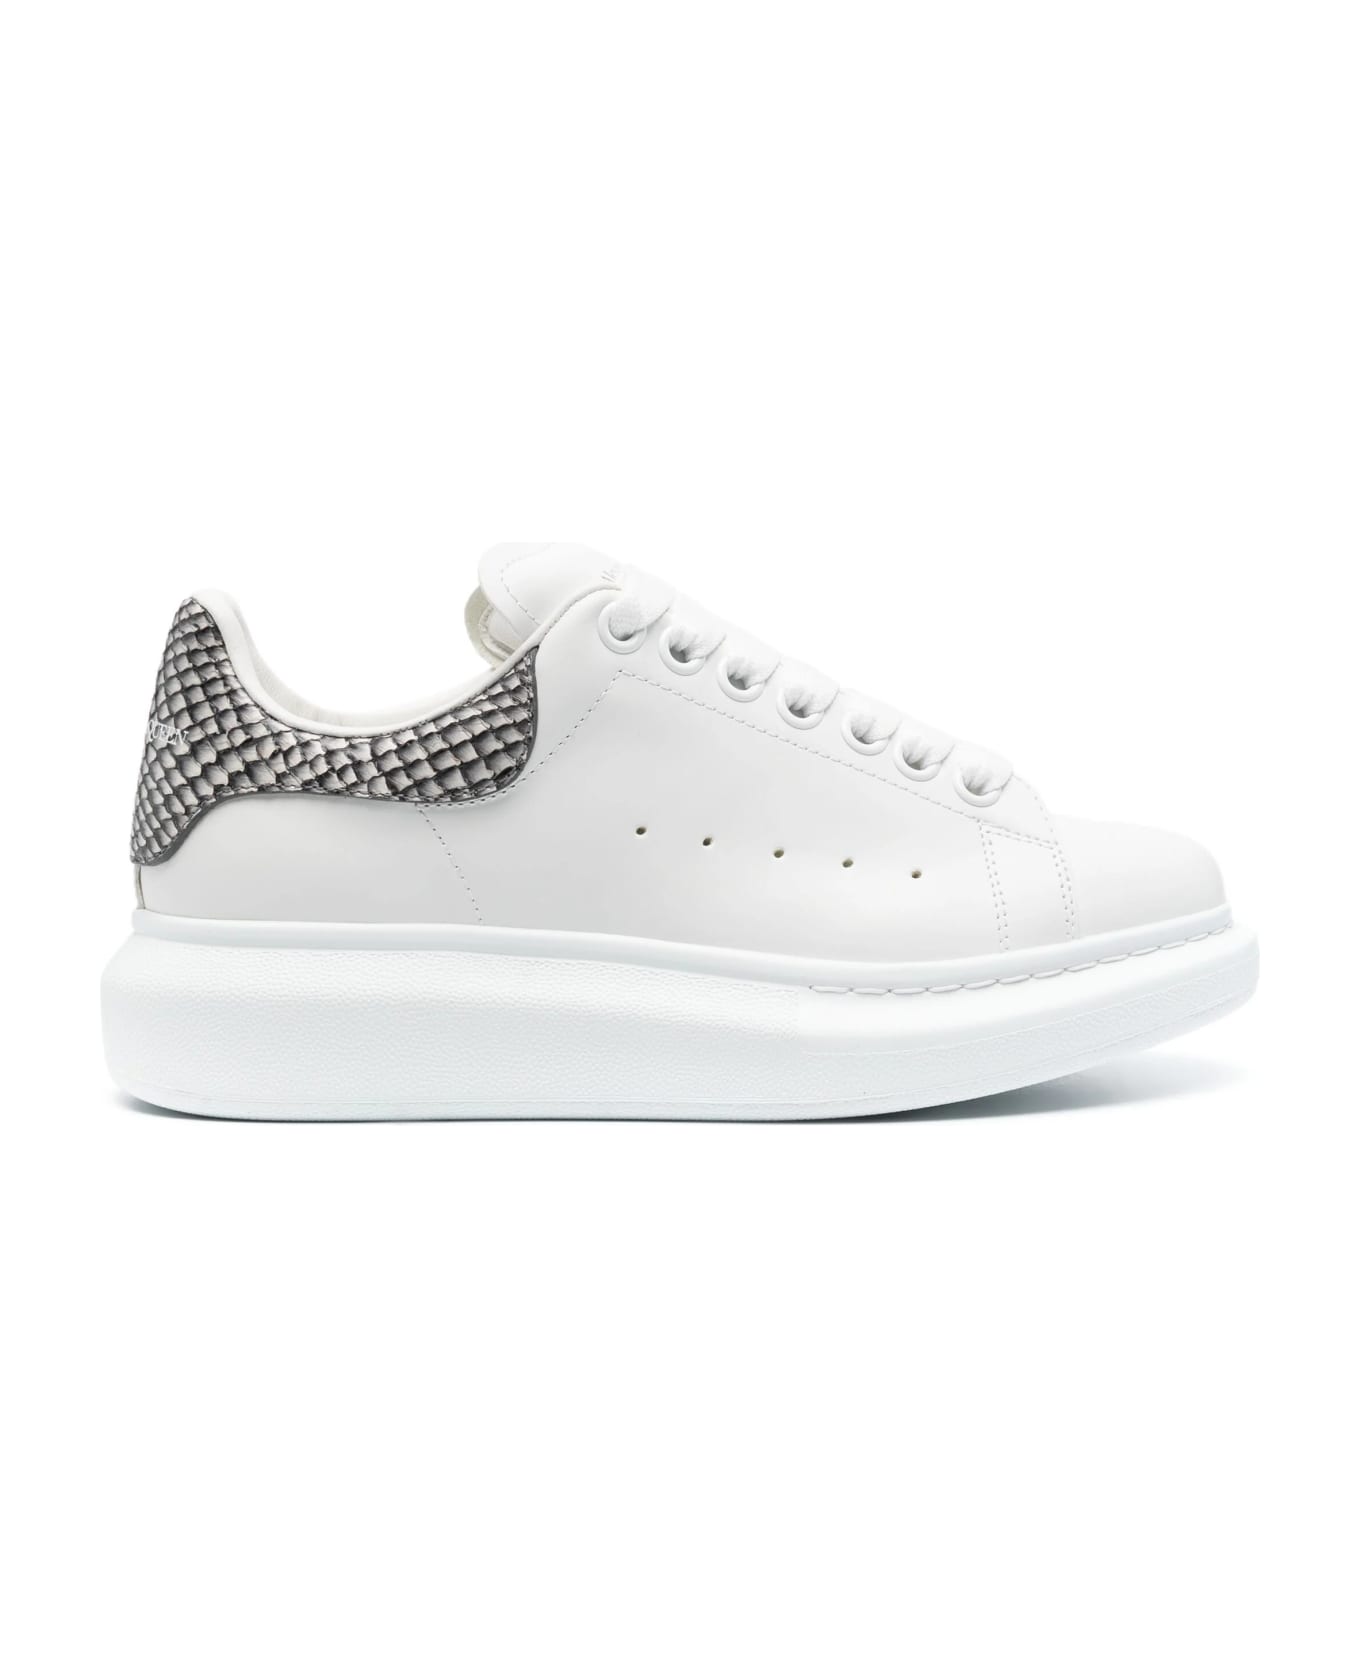 Alexander McQueen White Oversized Sneakers With Snake Print features - White